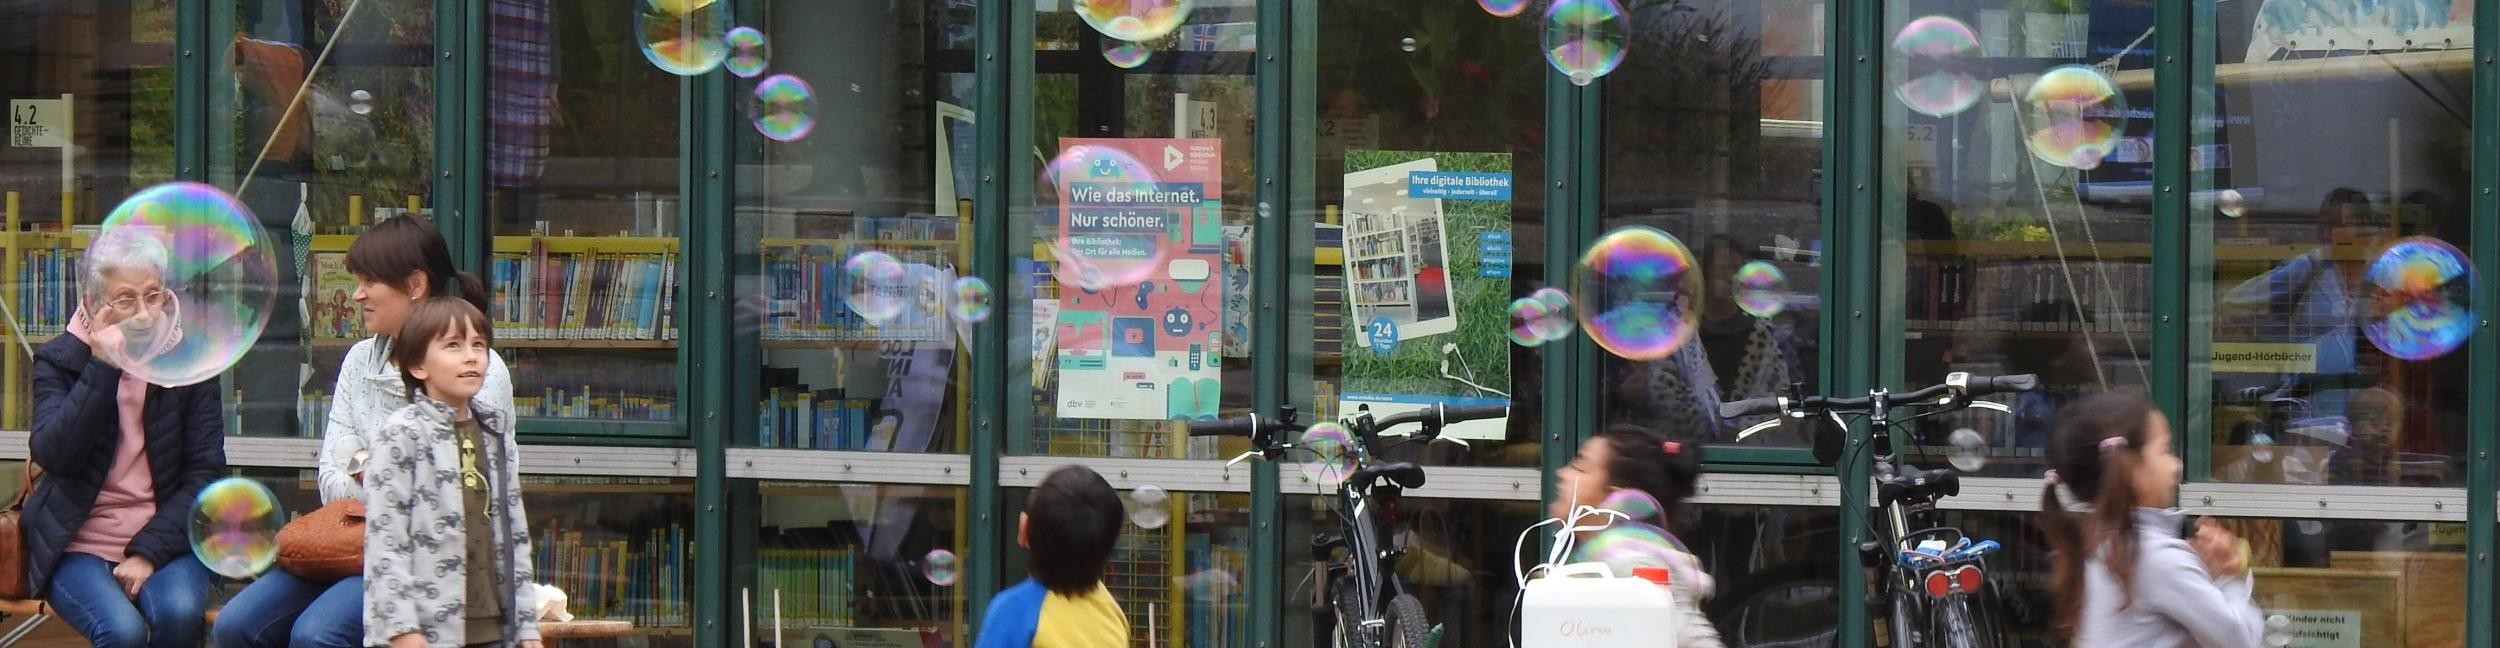 Children with soap bubbles in front of the library